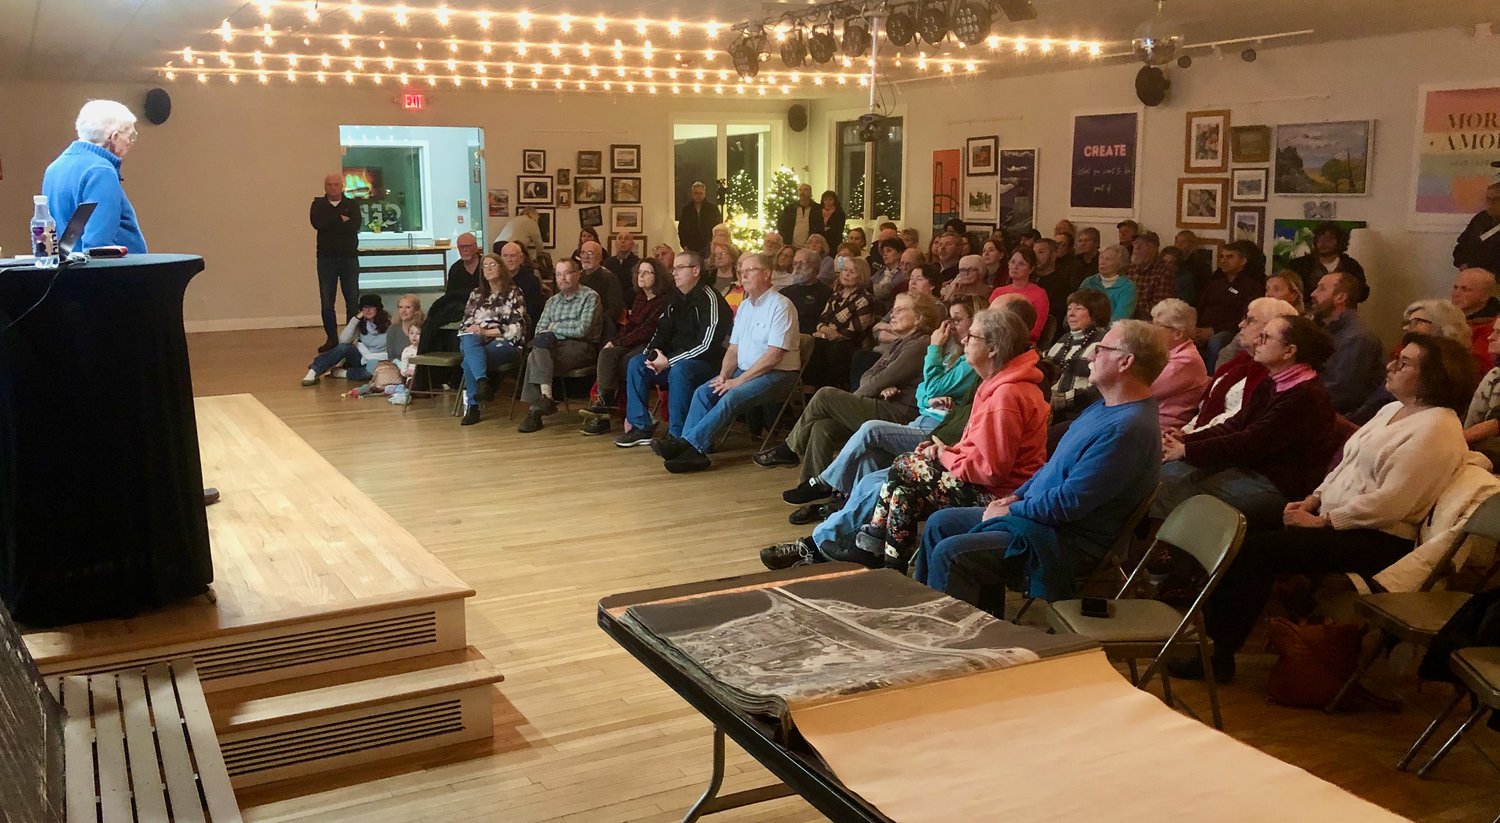 Town Historian Jim Garman (far left) speaks to about 100 people during his lecture on North Portsmouth history at the CFP Arts, Wellness, and Community Center in Common Fence Point on Wednesday, Jan. 25.